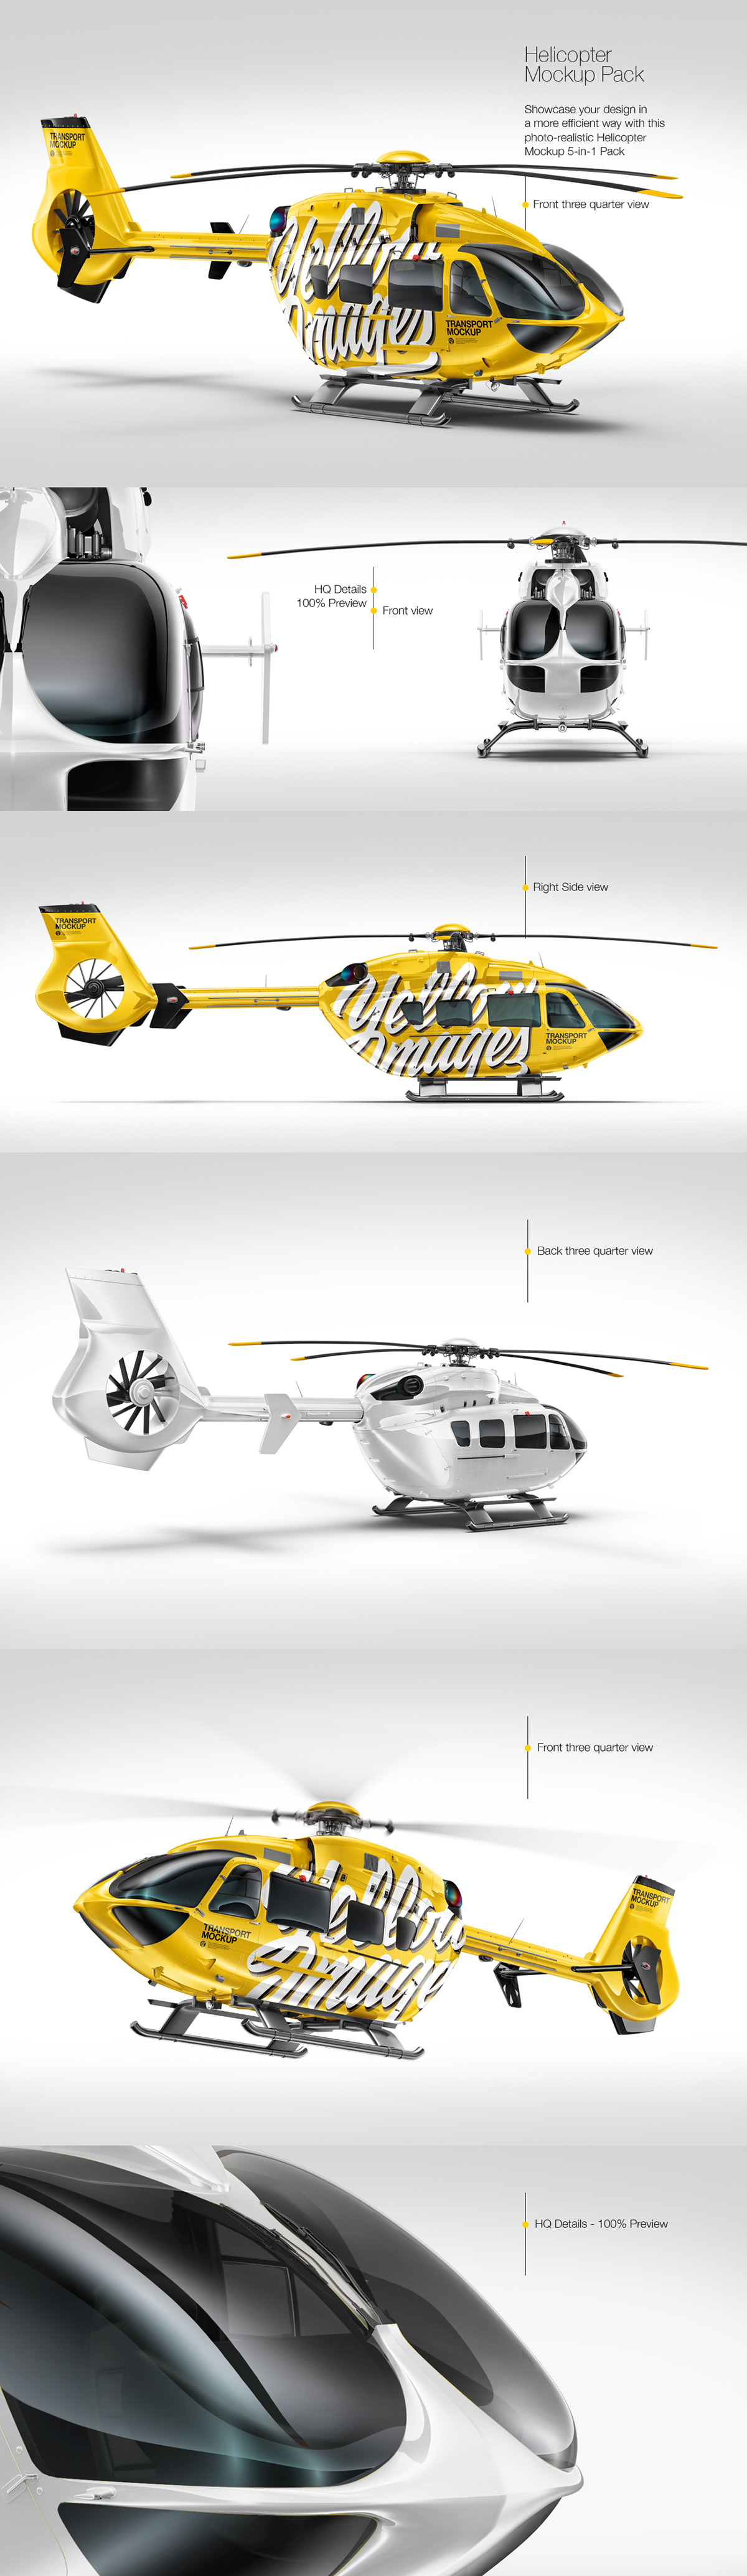 Aircraft Copter eurocopter eurocopter ec145 helicopter Mockup Transport Vehicle